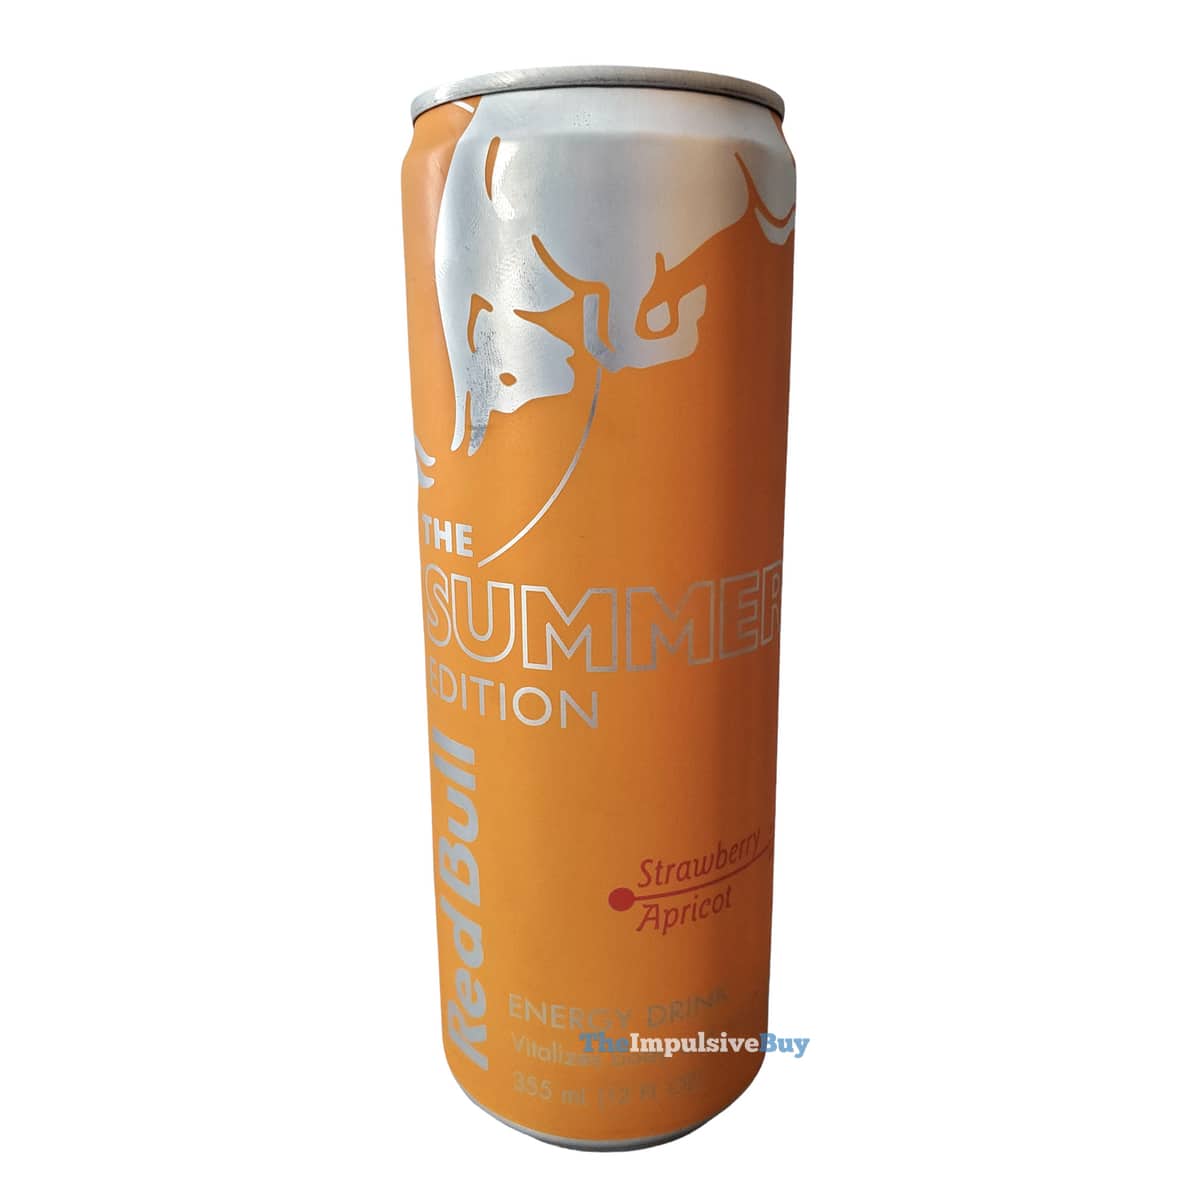 The Summer Edition, Red Bull Editions,  Product Review +  Ordering